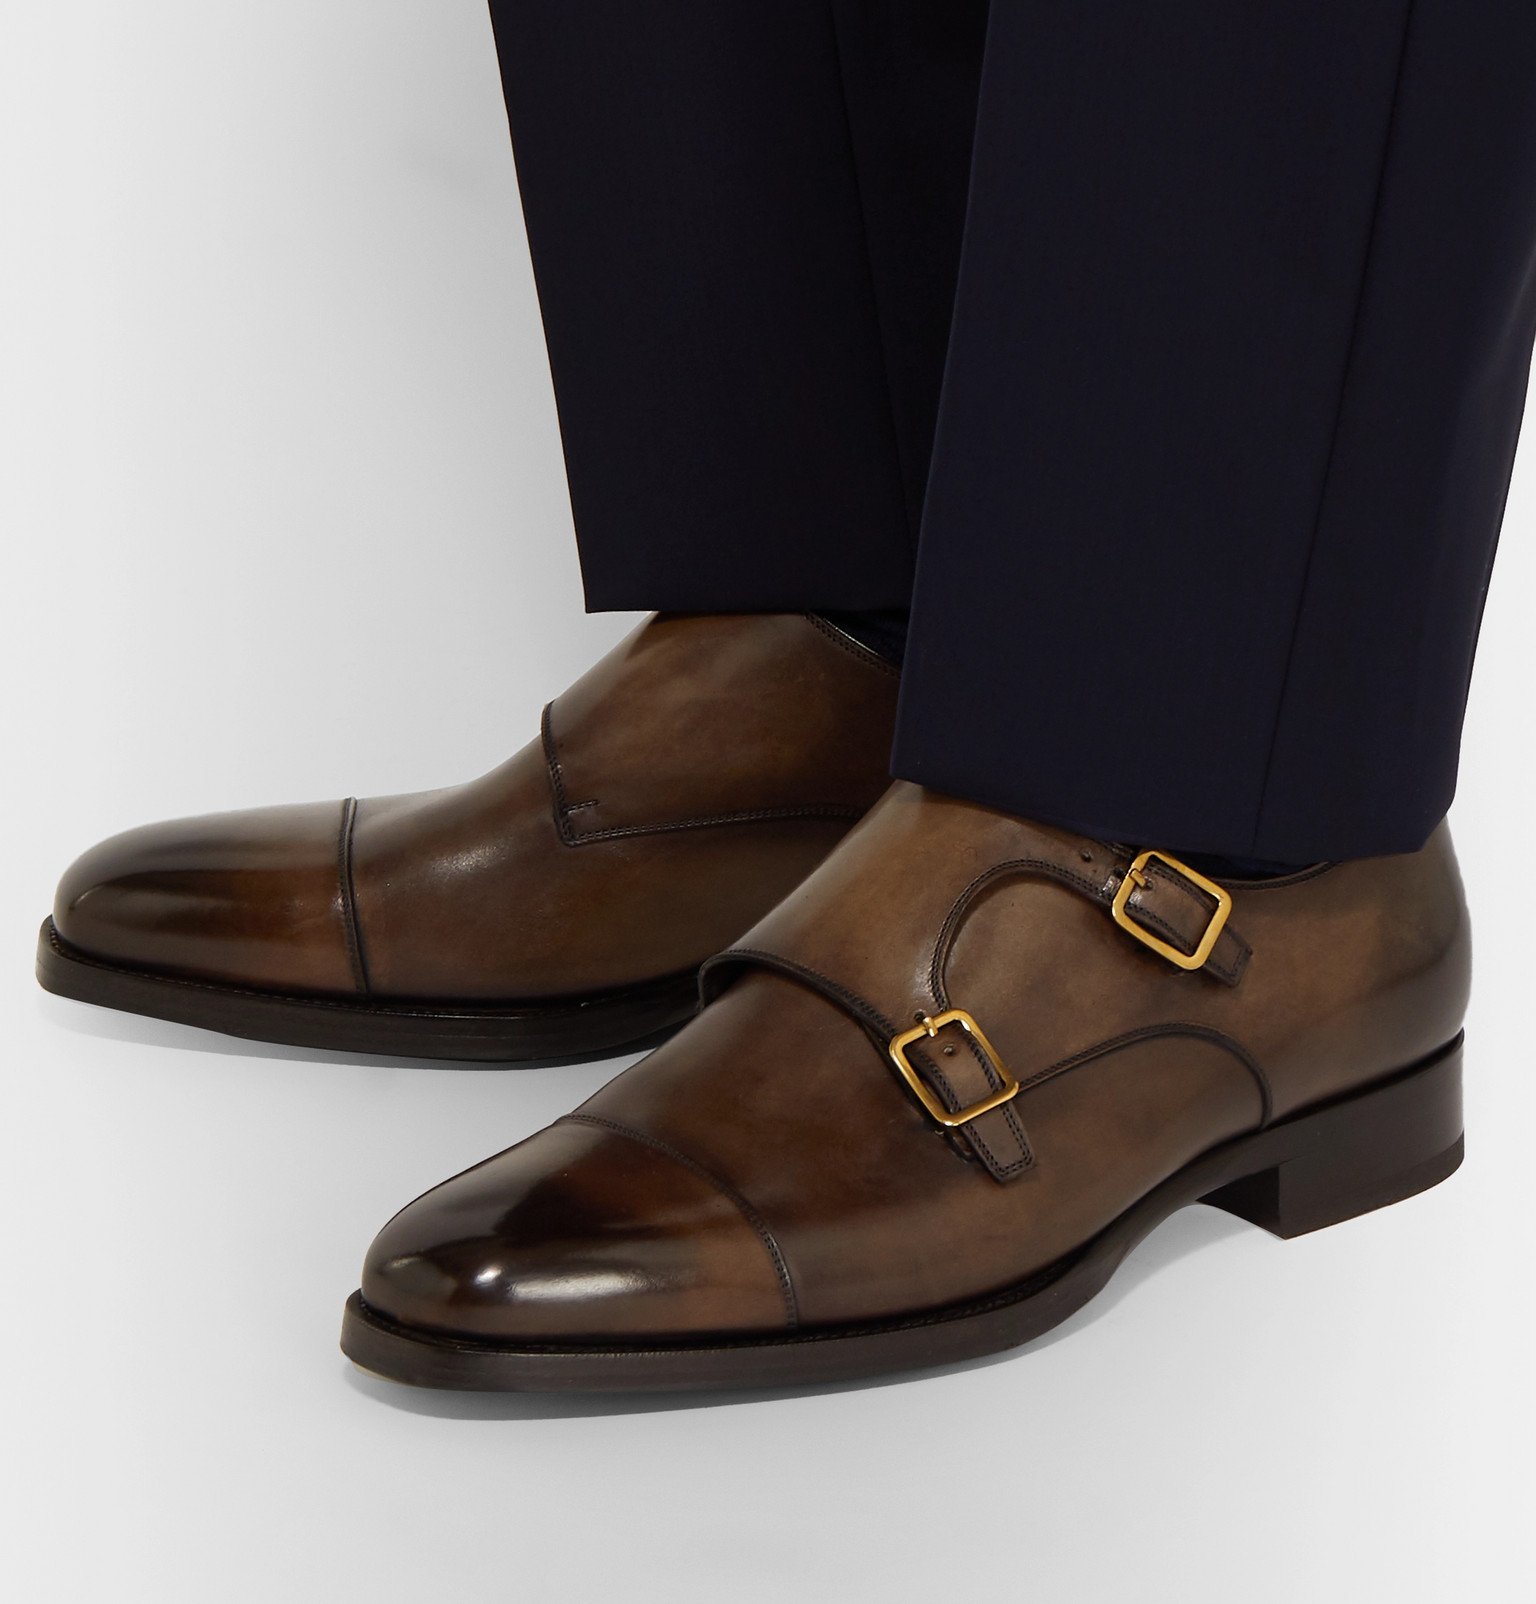 TOM FORD - Wessex Leather Monk-Strap Shoes - Brown TOM FORD